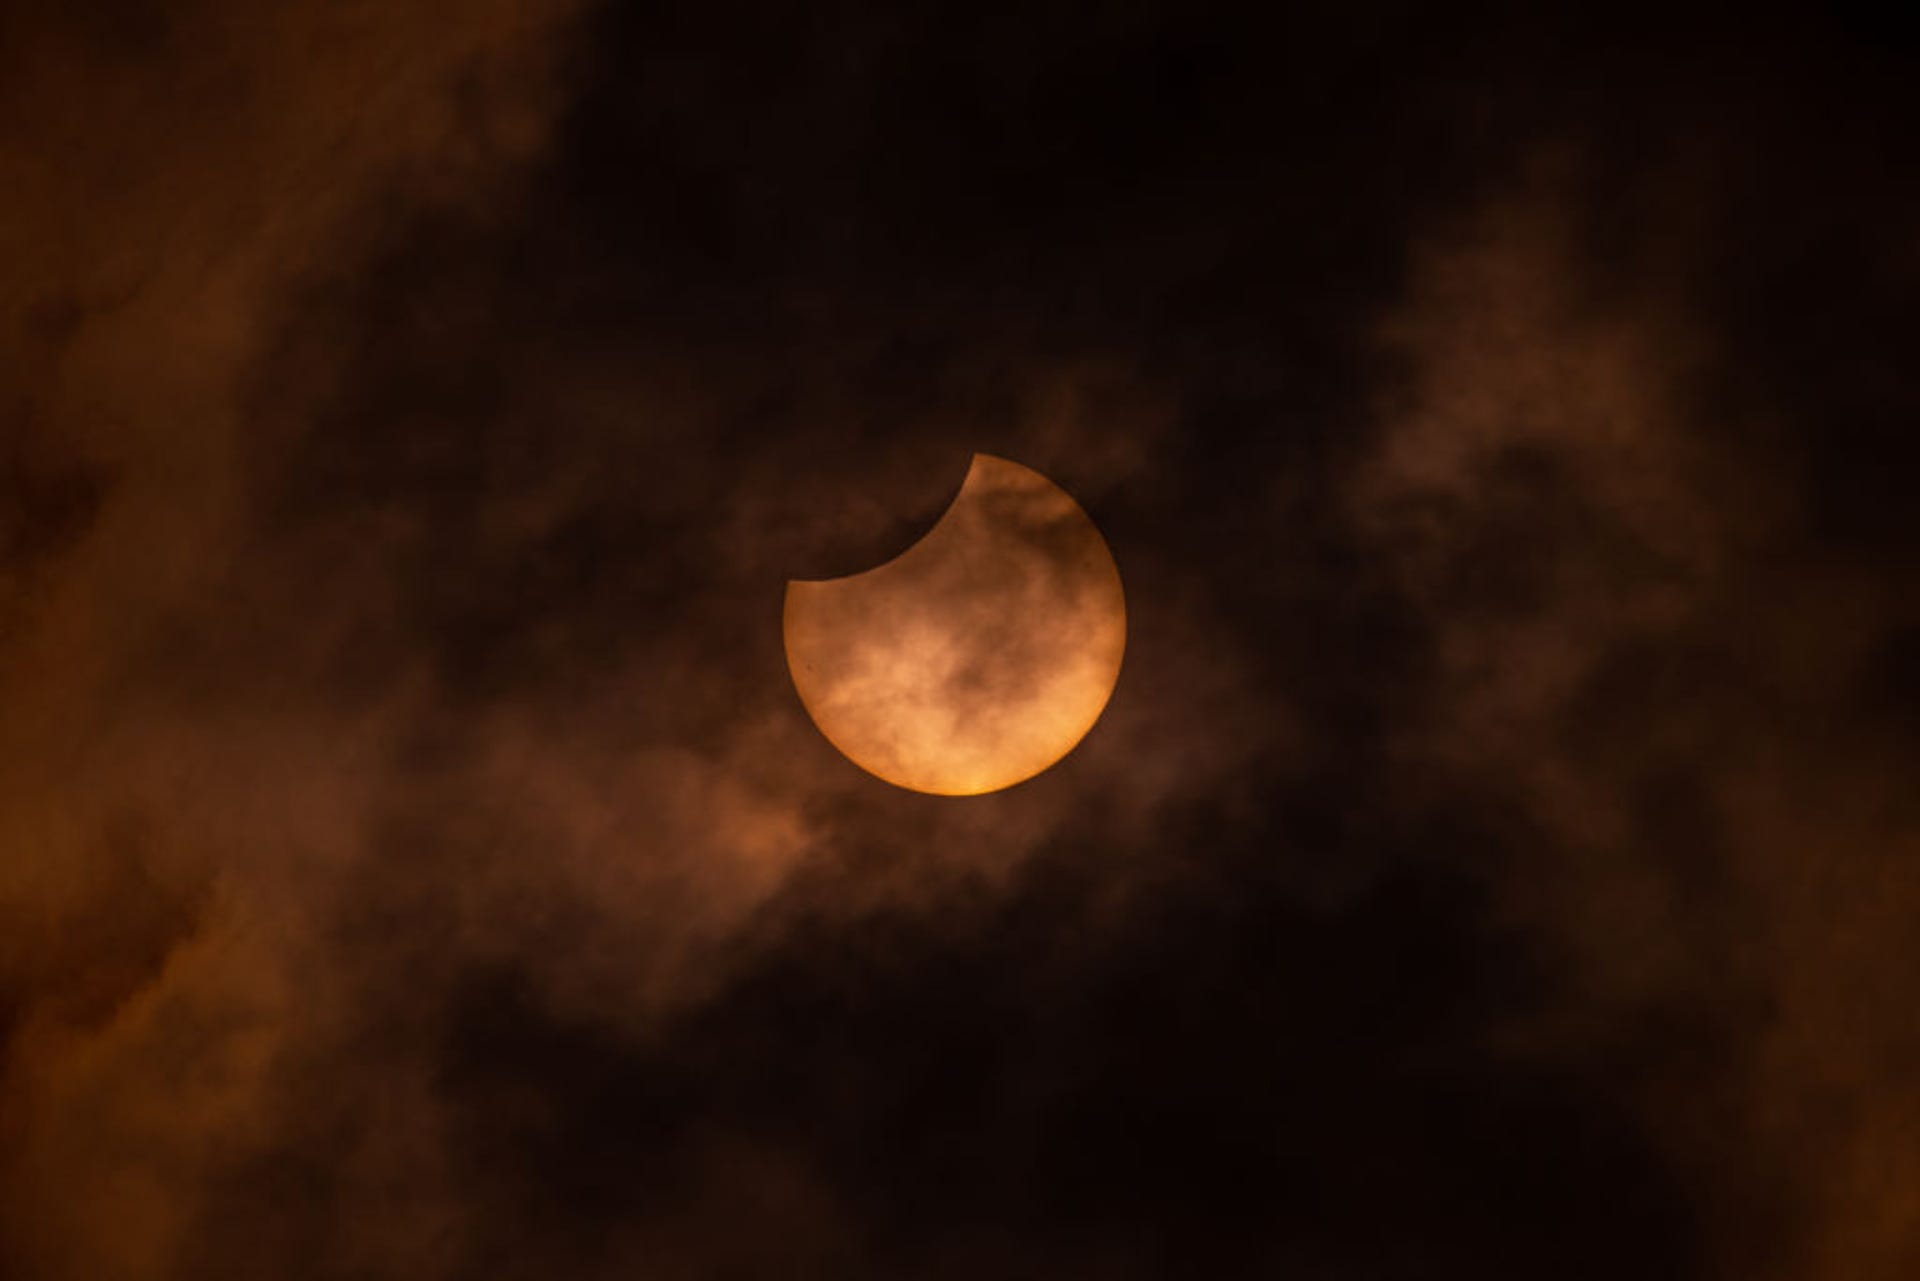 The glowing solar eclipse seen through the murky clouds in Italy